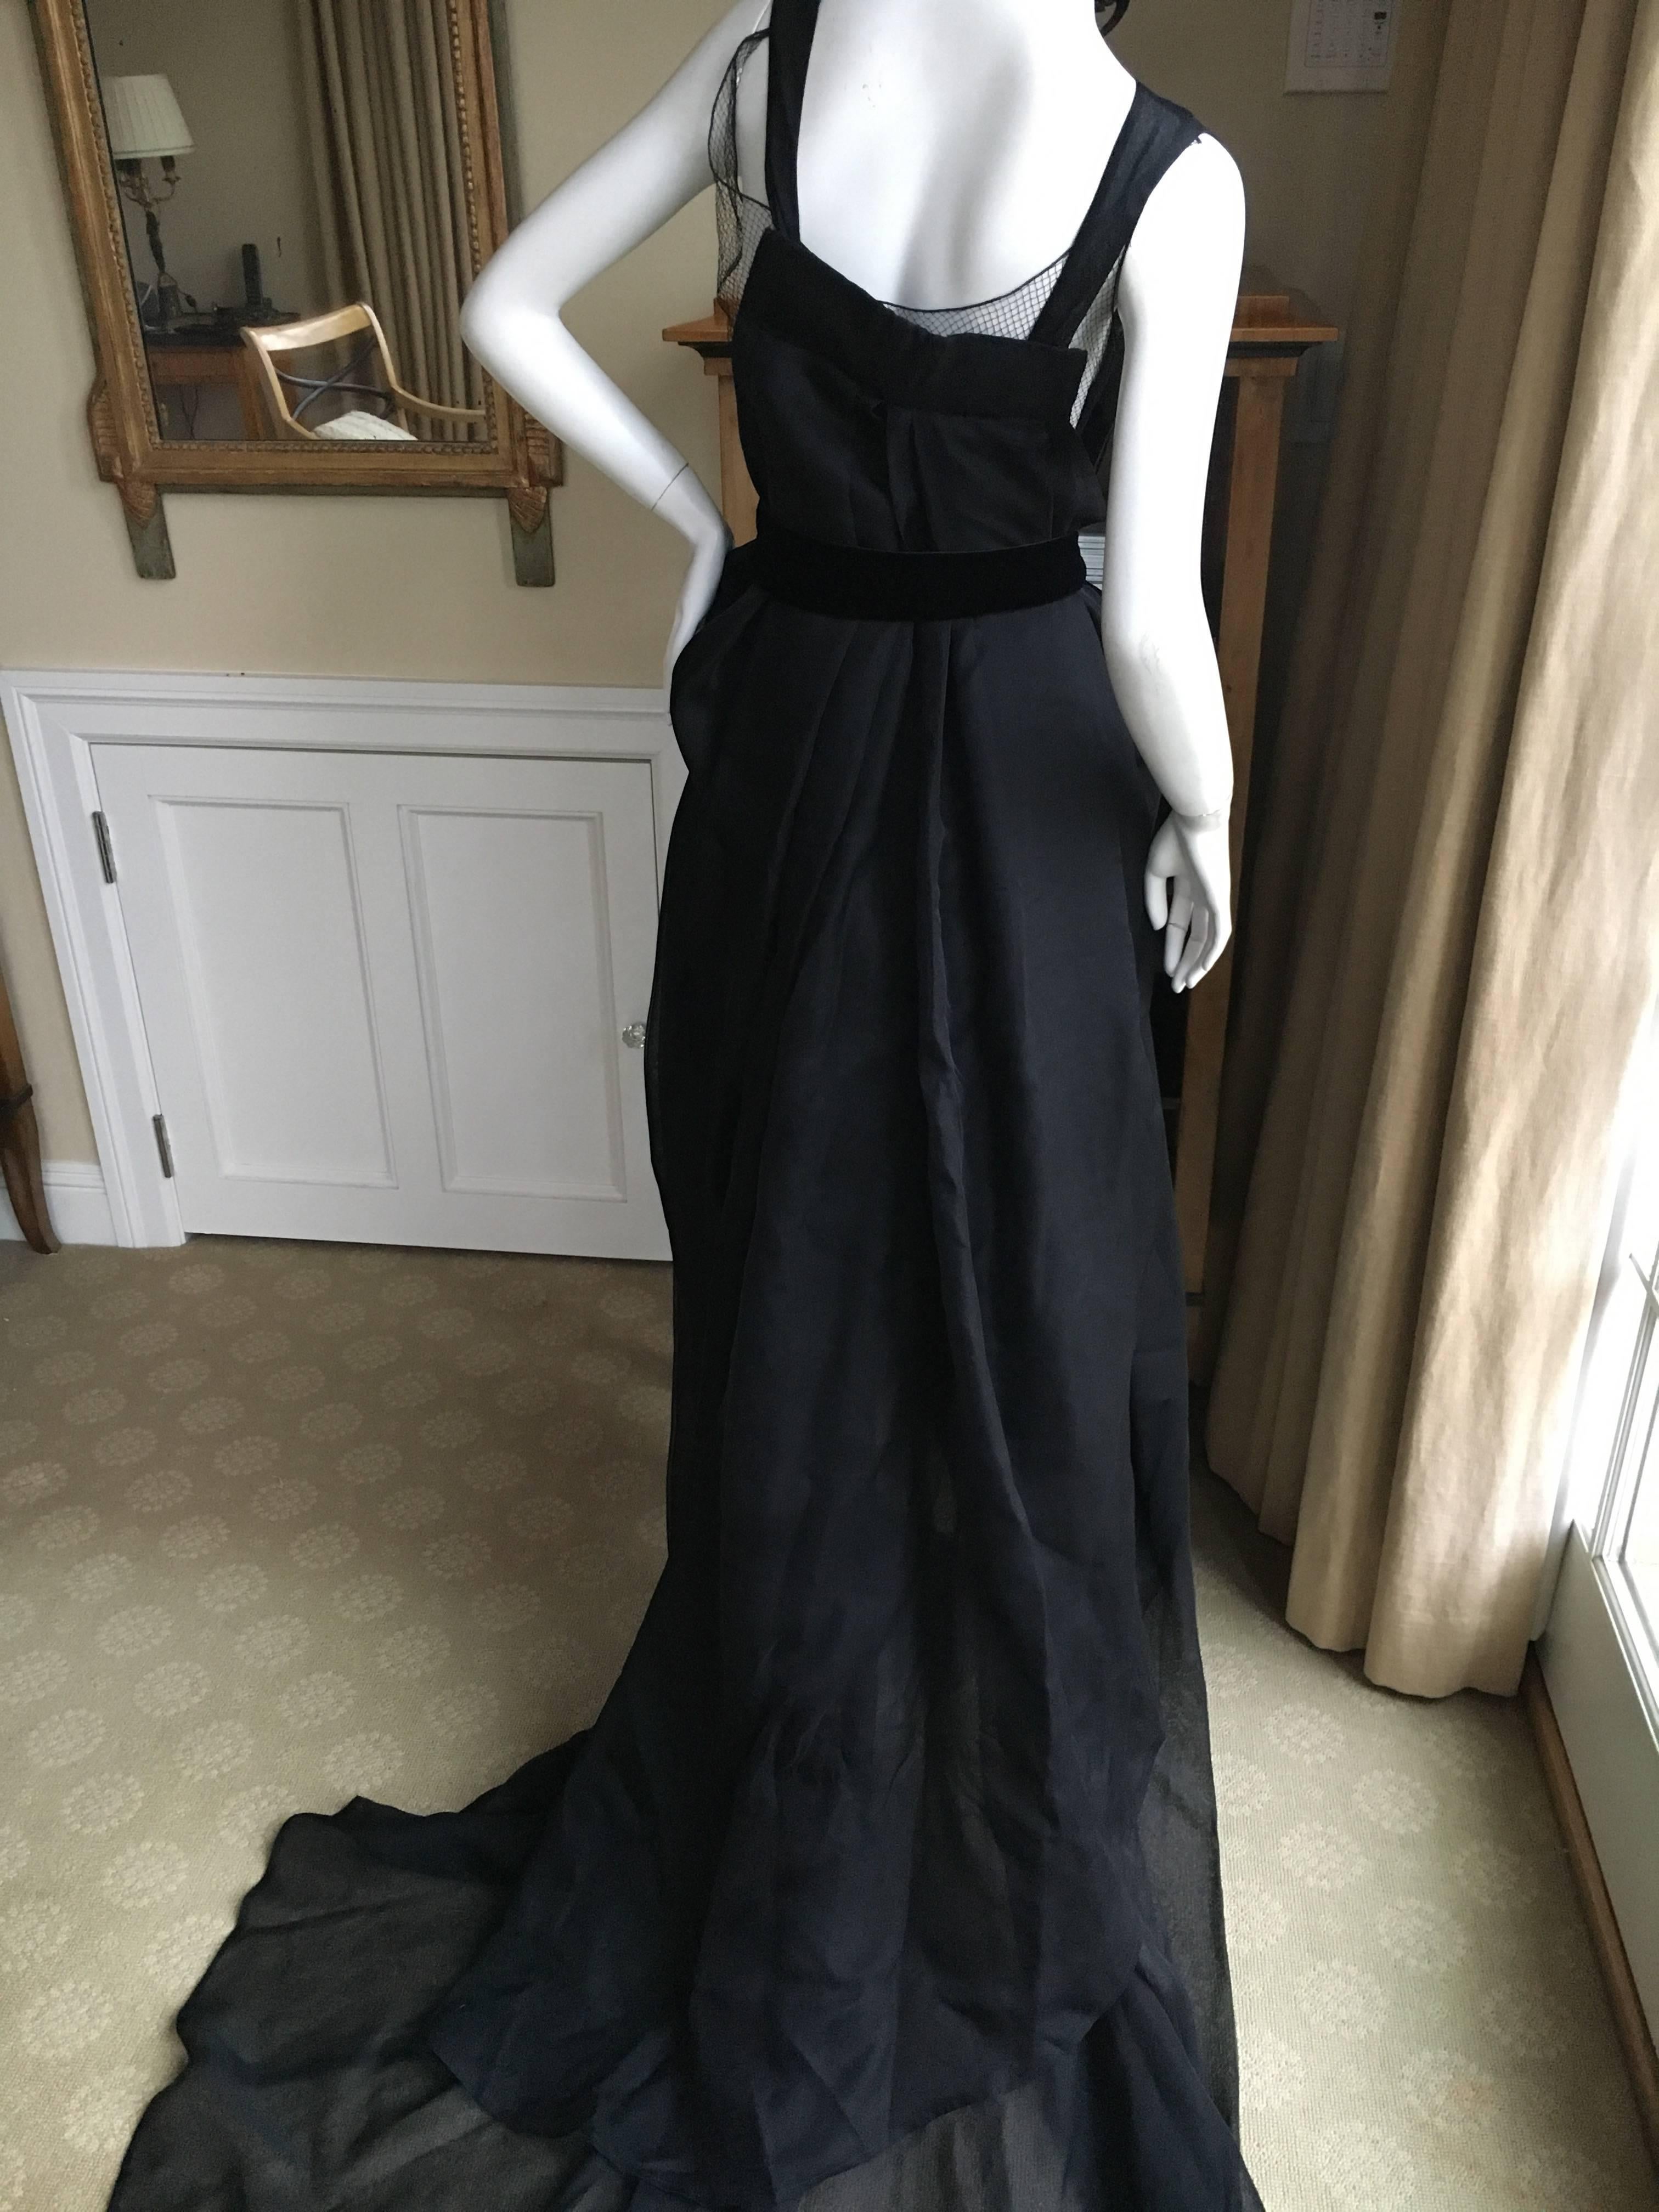 Yves Saint Laurent by Tom Ford Fall 2002 Final Look Black Wedding Dress  For Sale 1